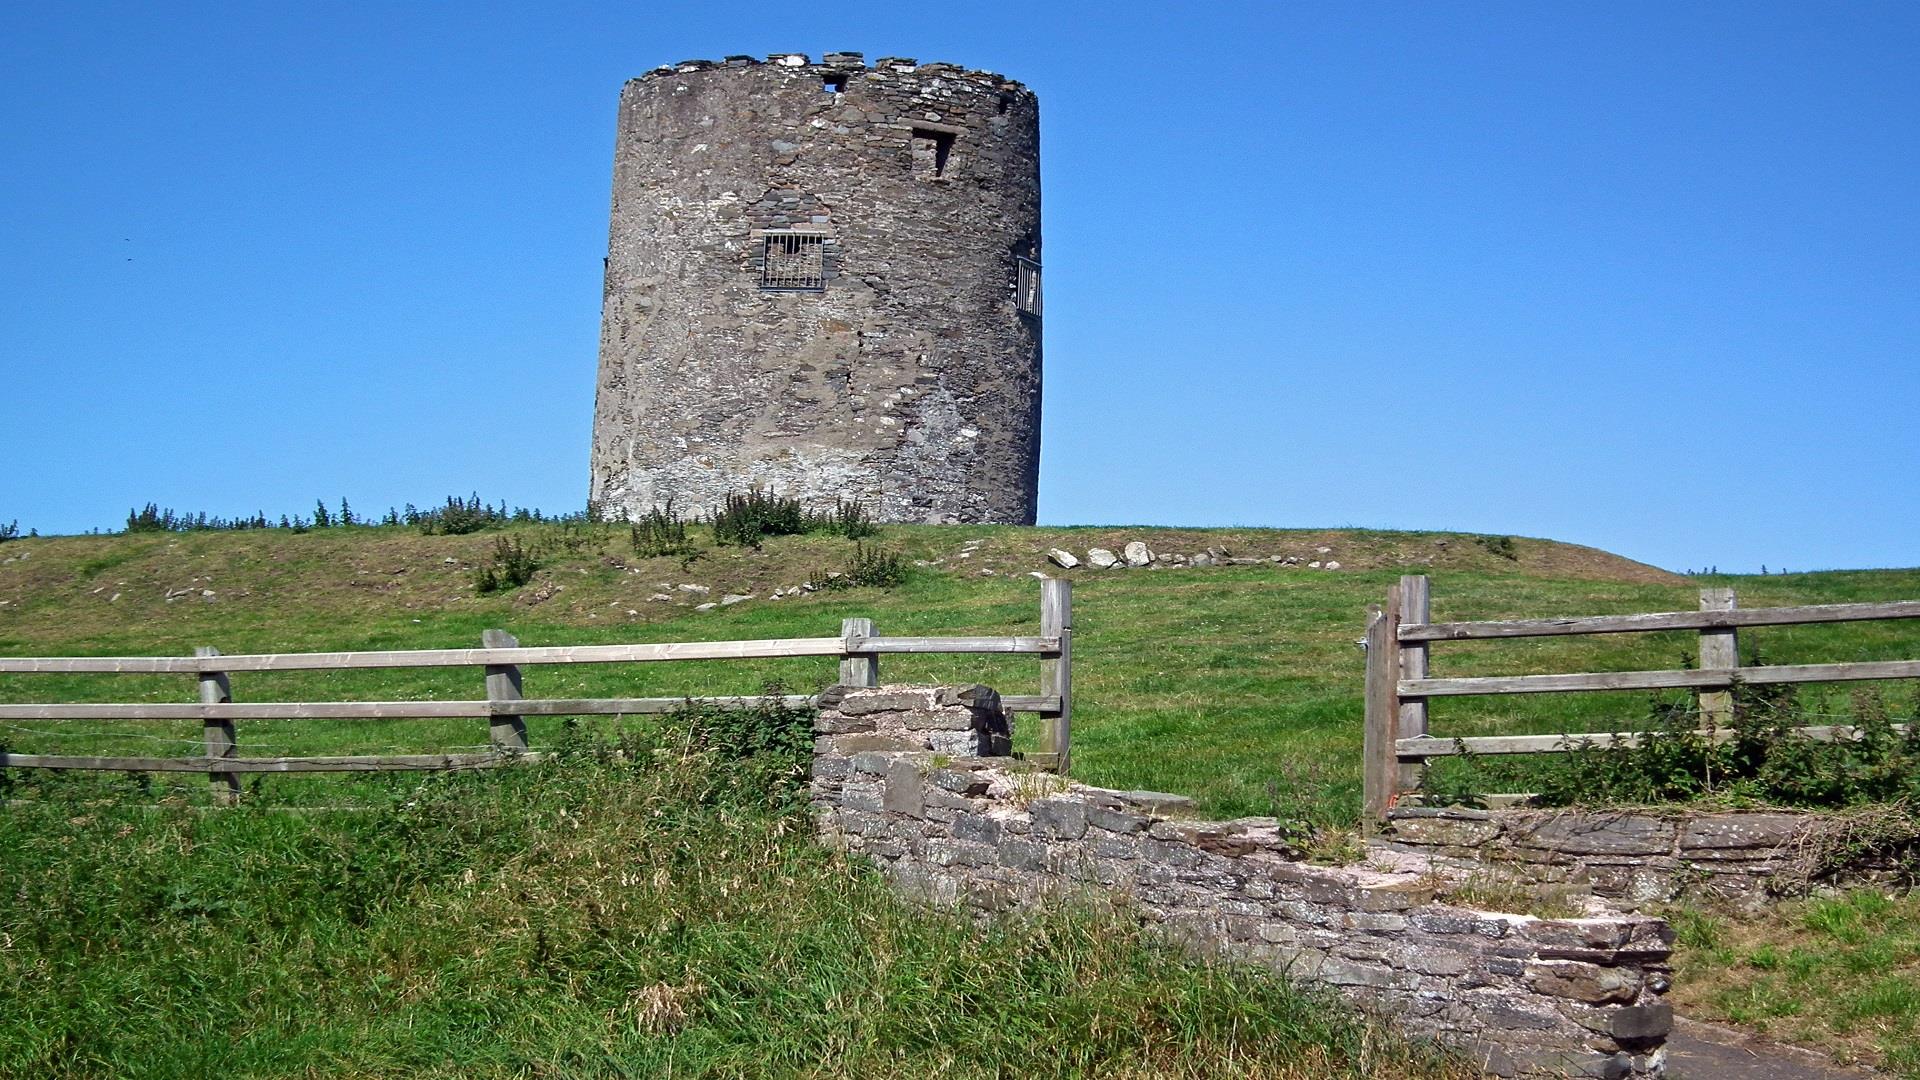 Windmill Hill in Portaferry.Close up photo of the windmill